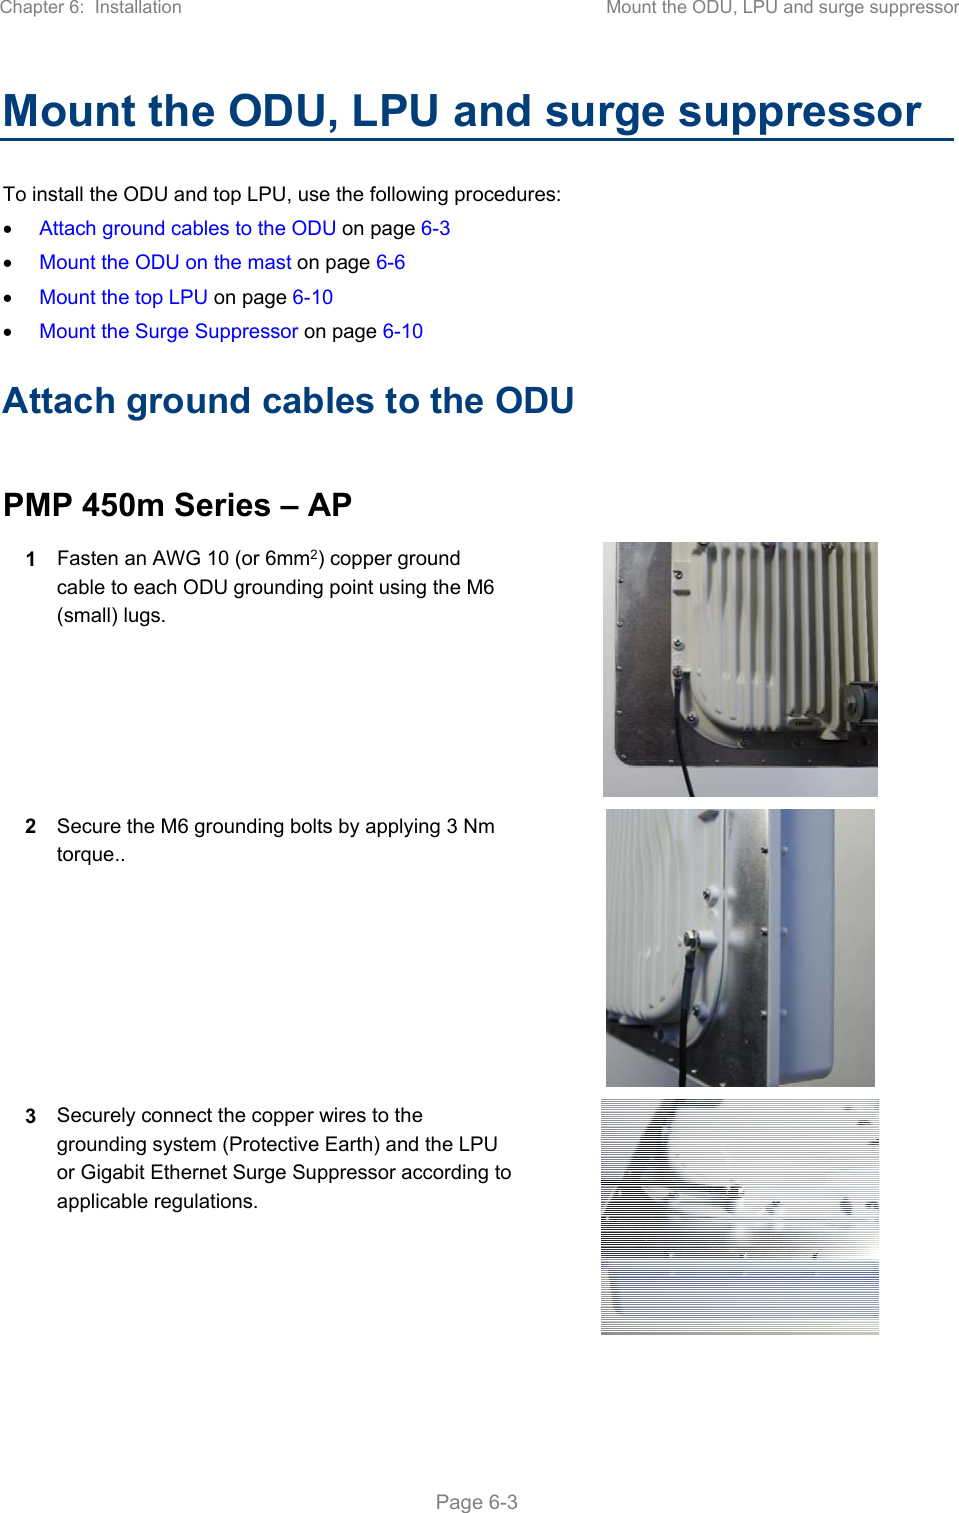 Chapter 6:  Installation  Mount the ODU, LPU and surge suppressor   Page 6-3 Mount the ODU, LPU and surge suppressor To install the ODU and top LPU, use the following procedures:  Attach ground cables to the ODU on page 6-3  Mount the ODU on the mast on page 6-6  Mount the top LPU on page 6-10  Mount the Surge Suppressor on page 6-10 Attach ground cables to the ODU  PMP 450m Series – AP 1  Fasten an AWG 10 (or 6mm2) copper ground cable to each ODU grounding point using the M6 (small) lugs.  2  Secure the M6 grounding bolts by applying 3 Nm torque..  3  Securely connect the copper wires to the grounding system (Protective Earth) and the LPU or Gigabit Ethernet Surge Suppressor according to applicable regulations.   